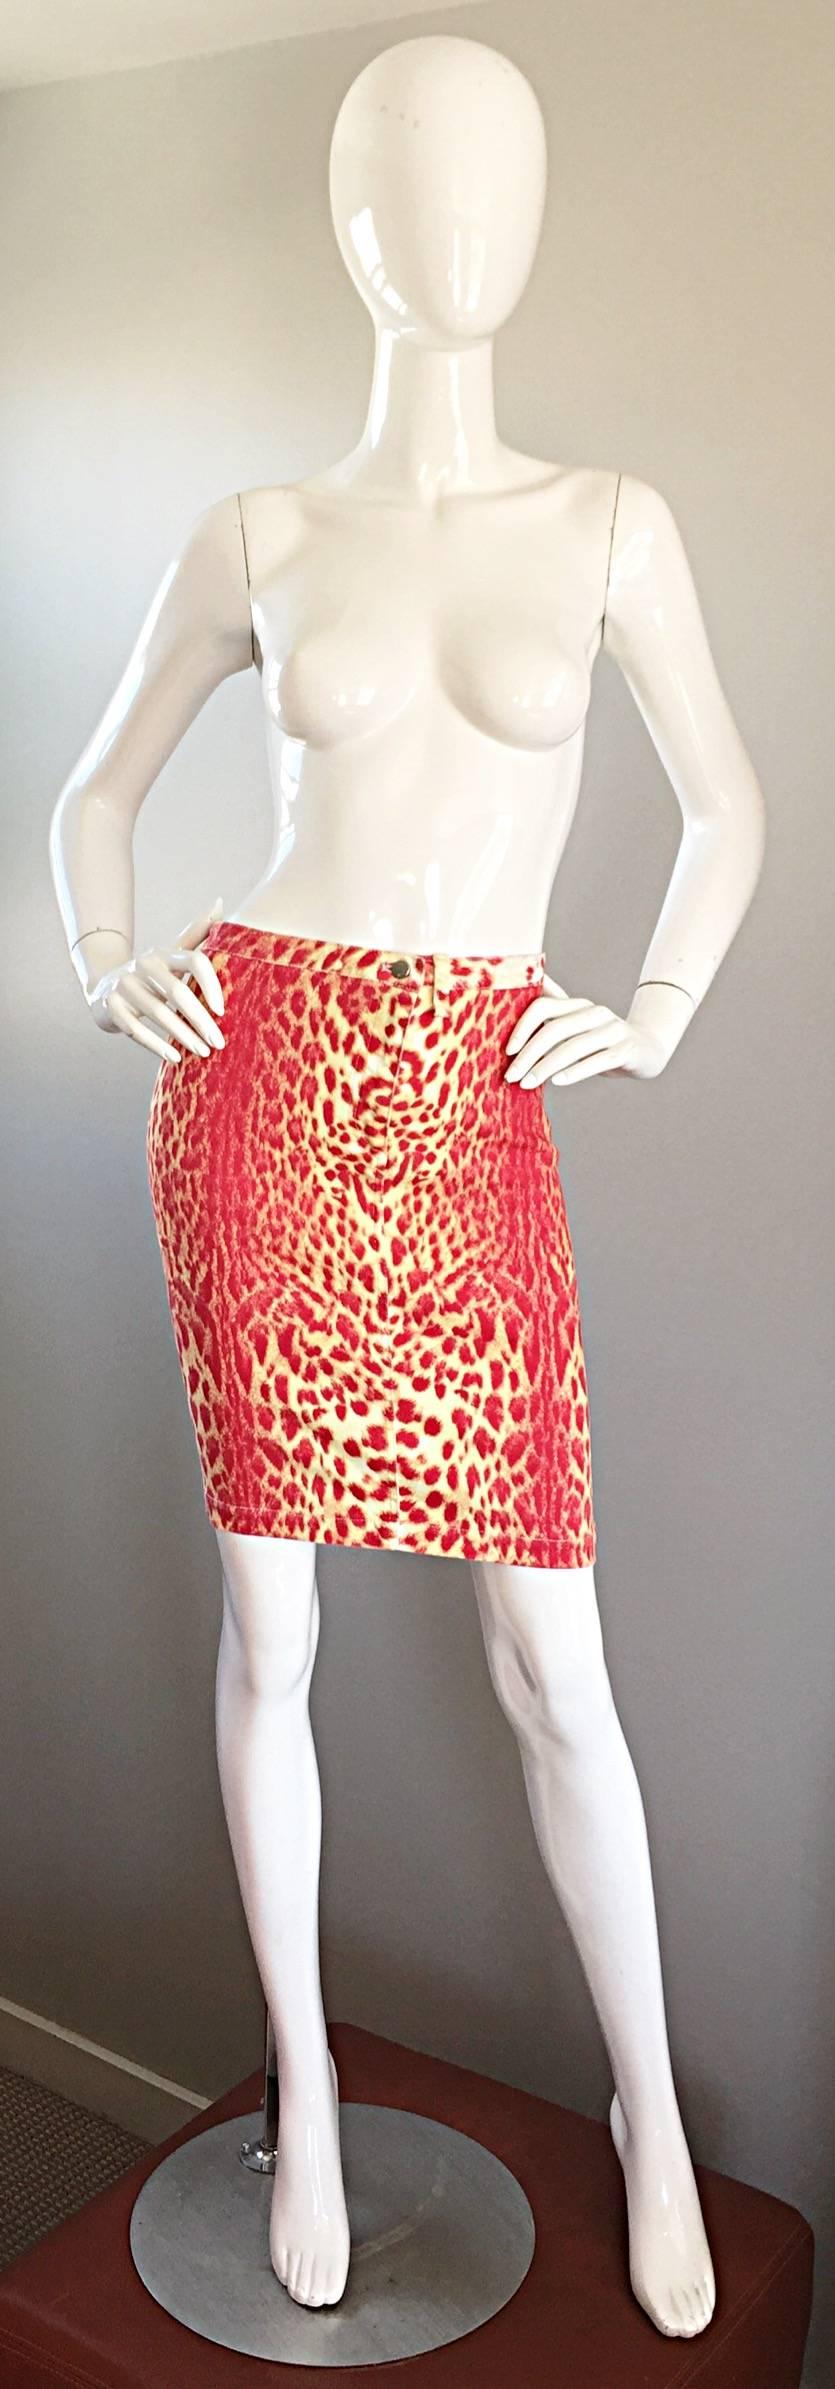 Sexy vintage ROBERTO CAVALLI early 90s red and yellow cheetah / leopard print bodycon skirt! Features an allover animal print. Hugs the body in all the right places. Flattering low rise fit, with button closure at front waist, and zipper fly.